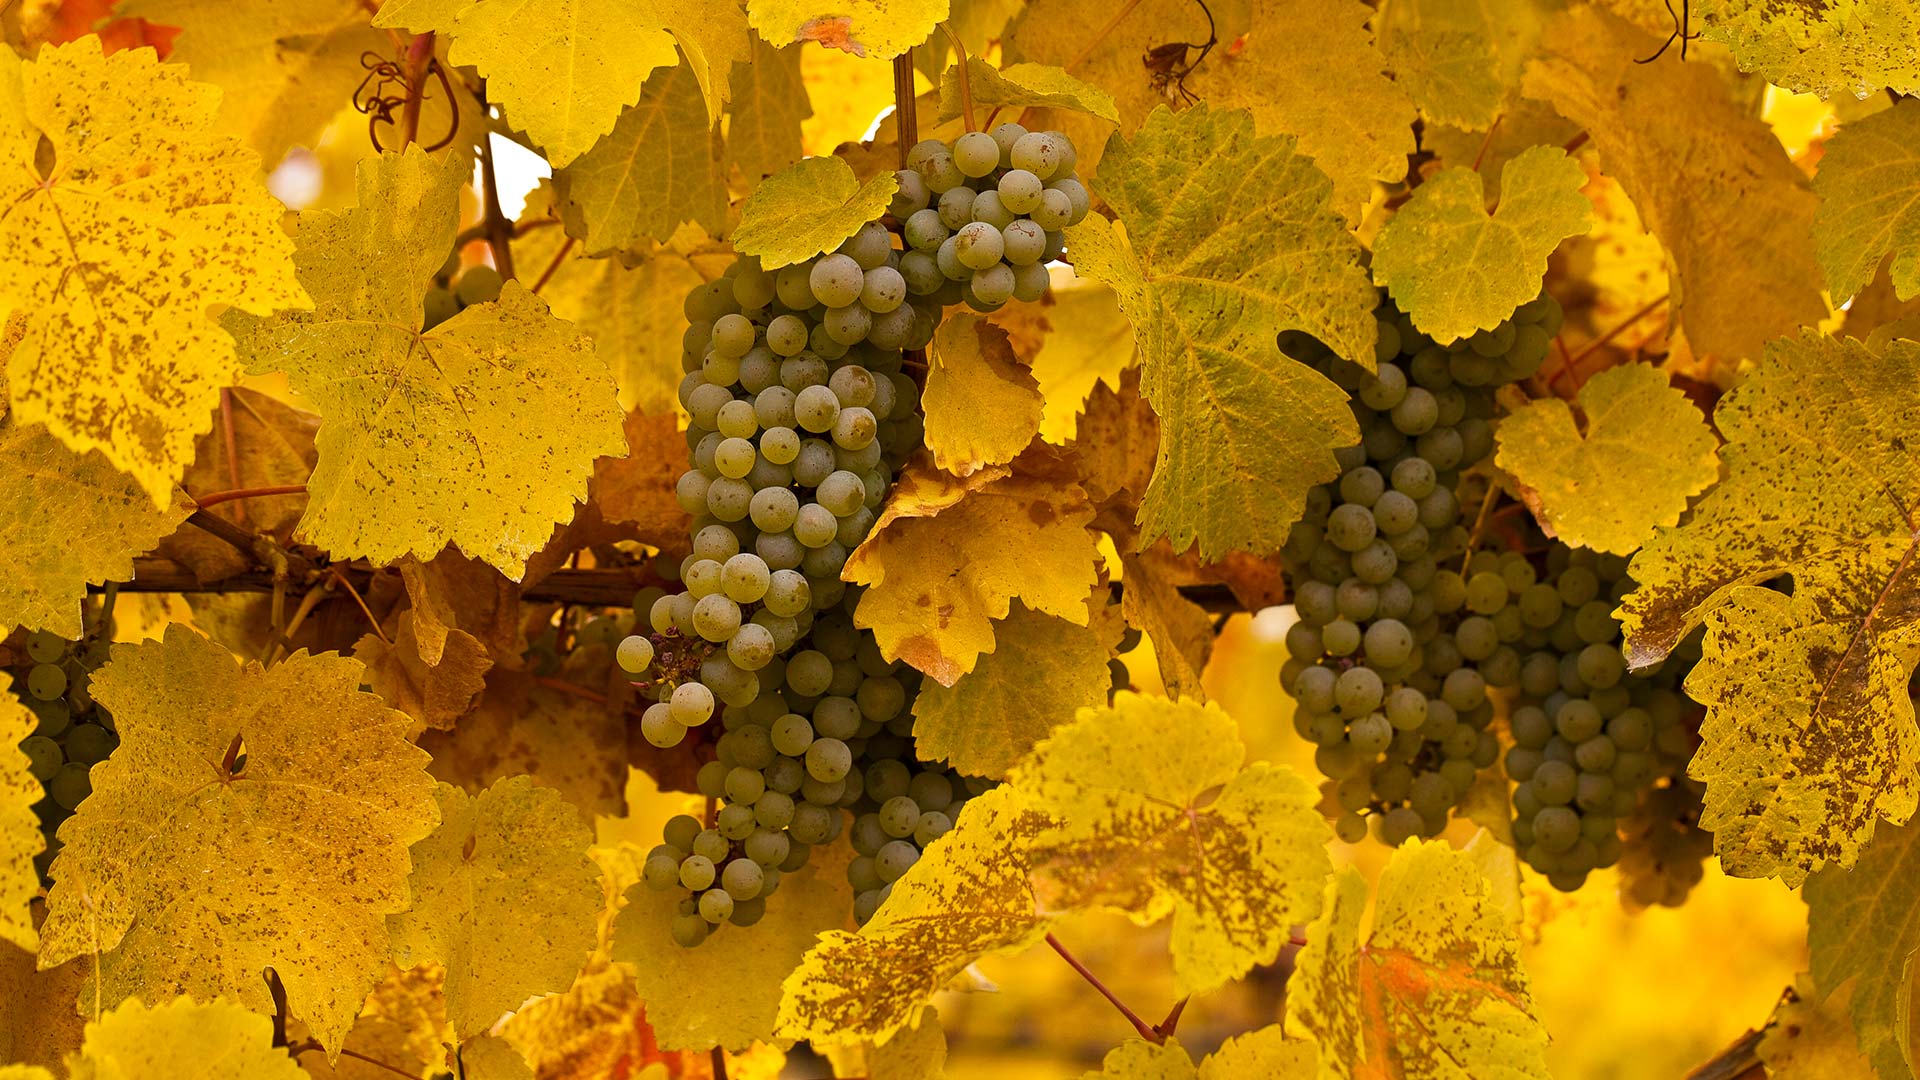 General 1920x1080 photography fruit grapes yellow leaves